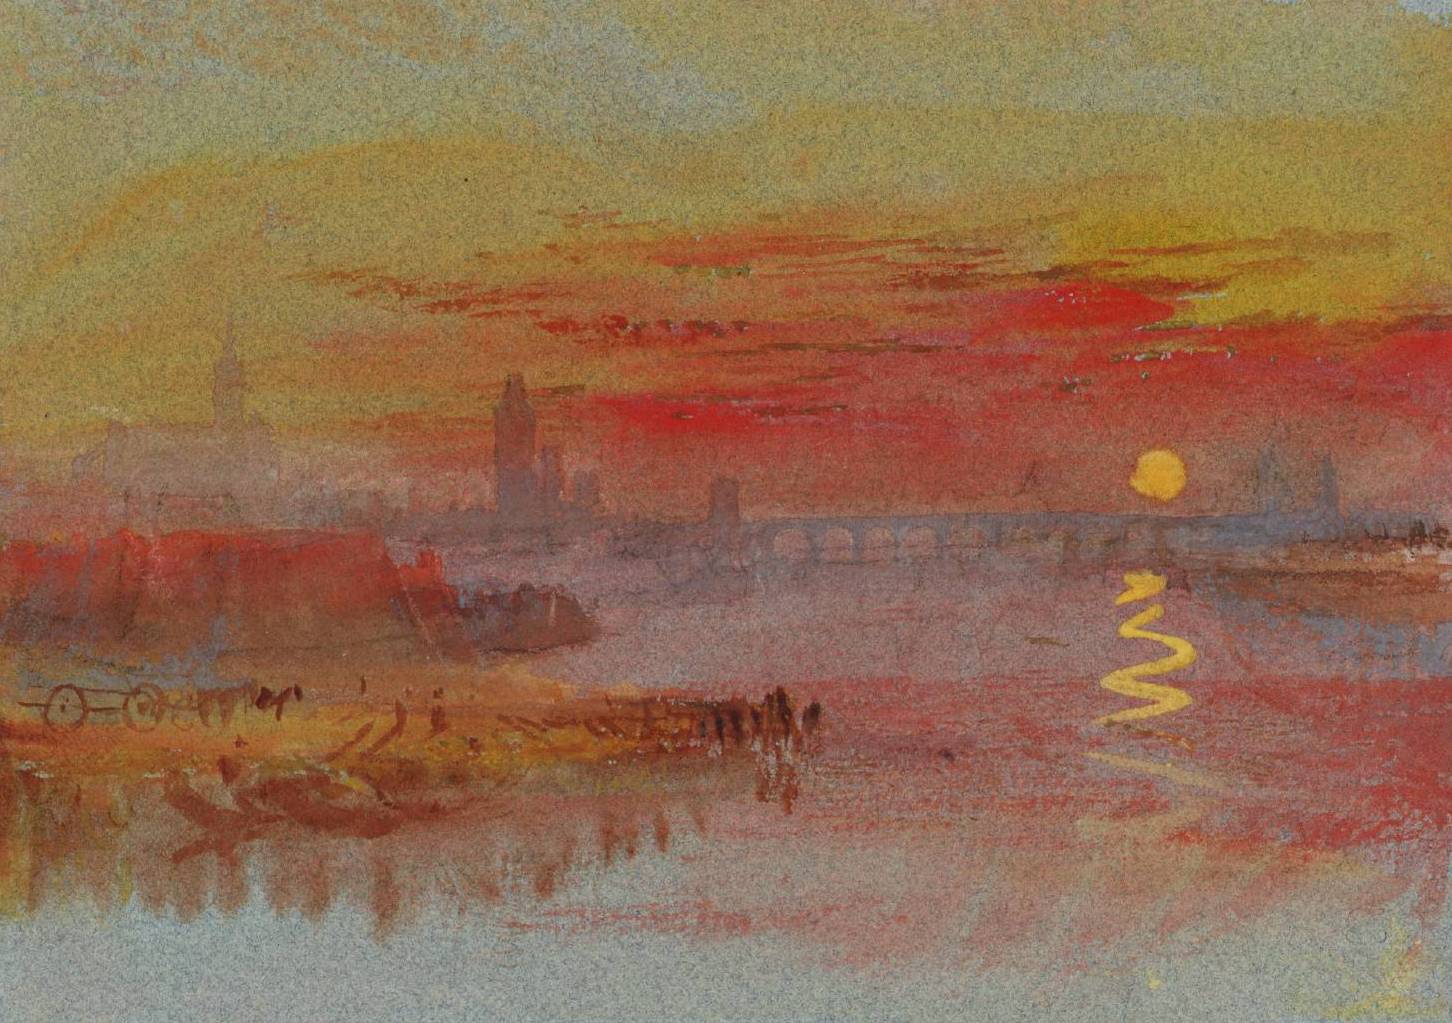 4. Joseph Mallord William Turner, The Scarlet Sunset, c.1830-40, Londres, National Gallery